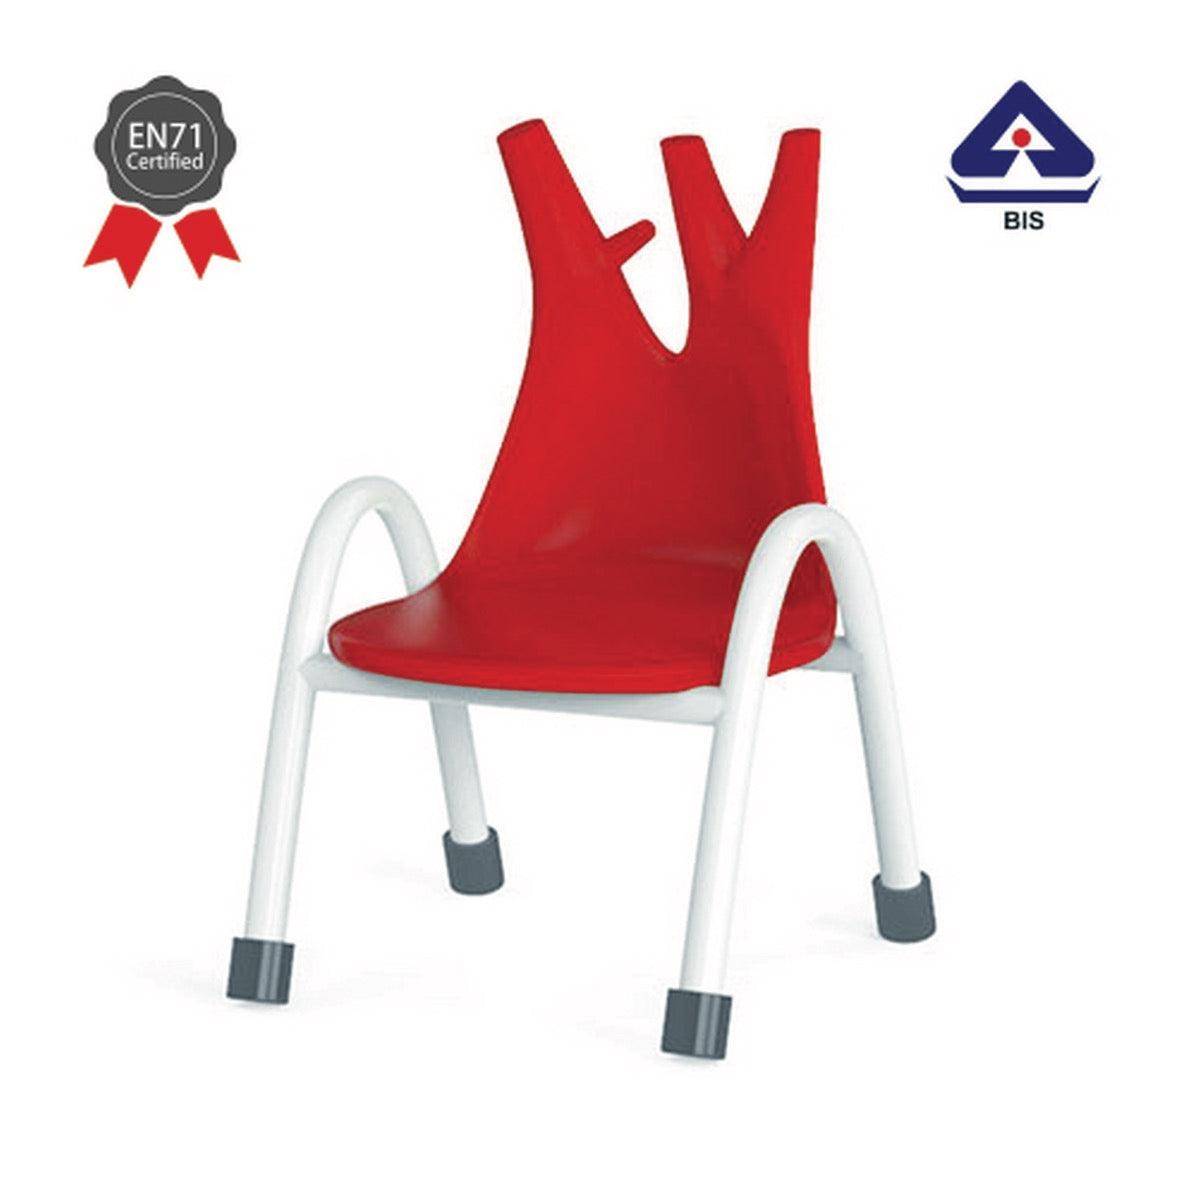 Ok Play Trunk Chair, Study Chair, Sturdy And Durable Chair, Plastic Chair, Perfect For Home, Creches And School, Red, 5 to 10 Years, Height 12 Inches